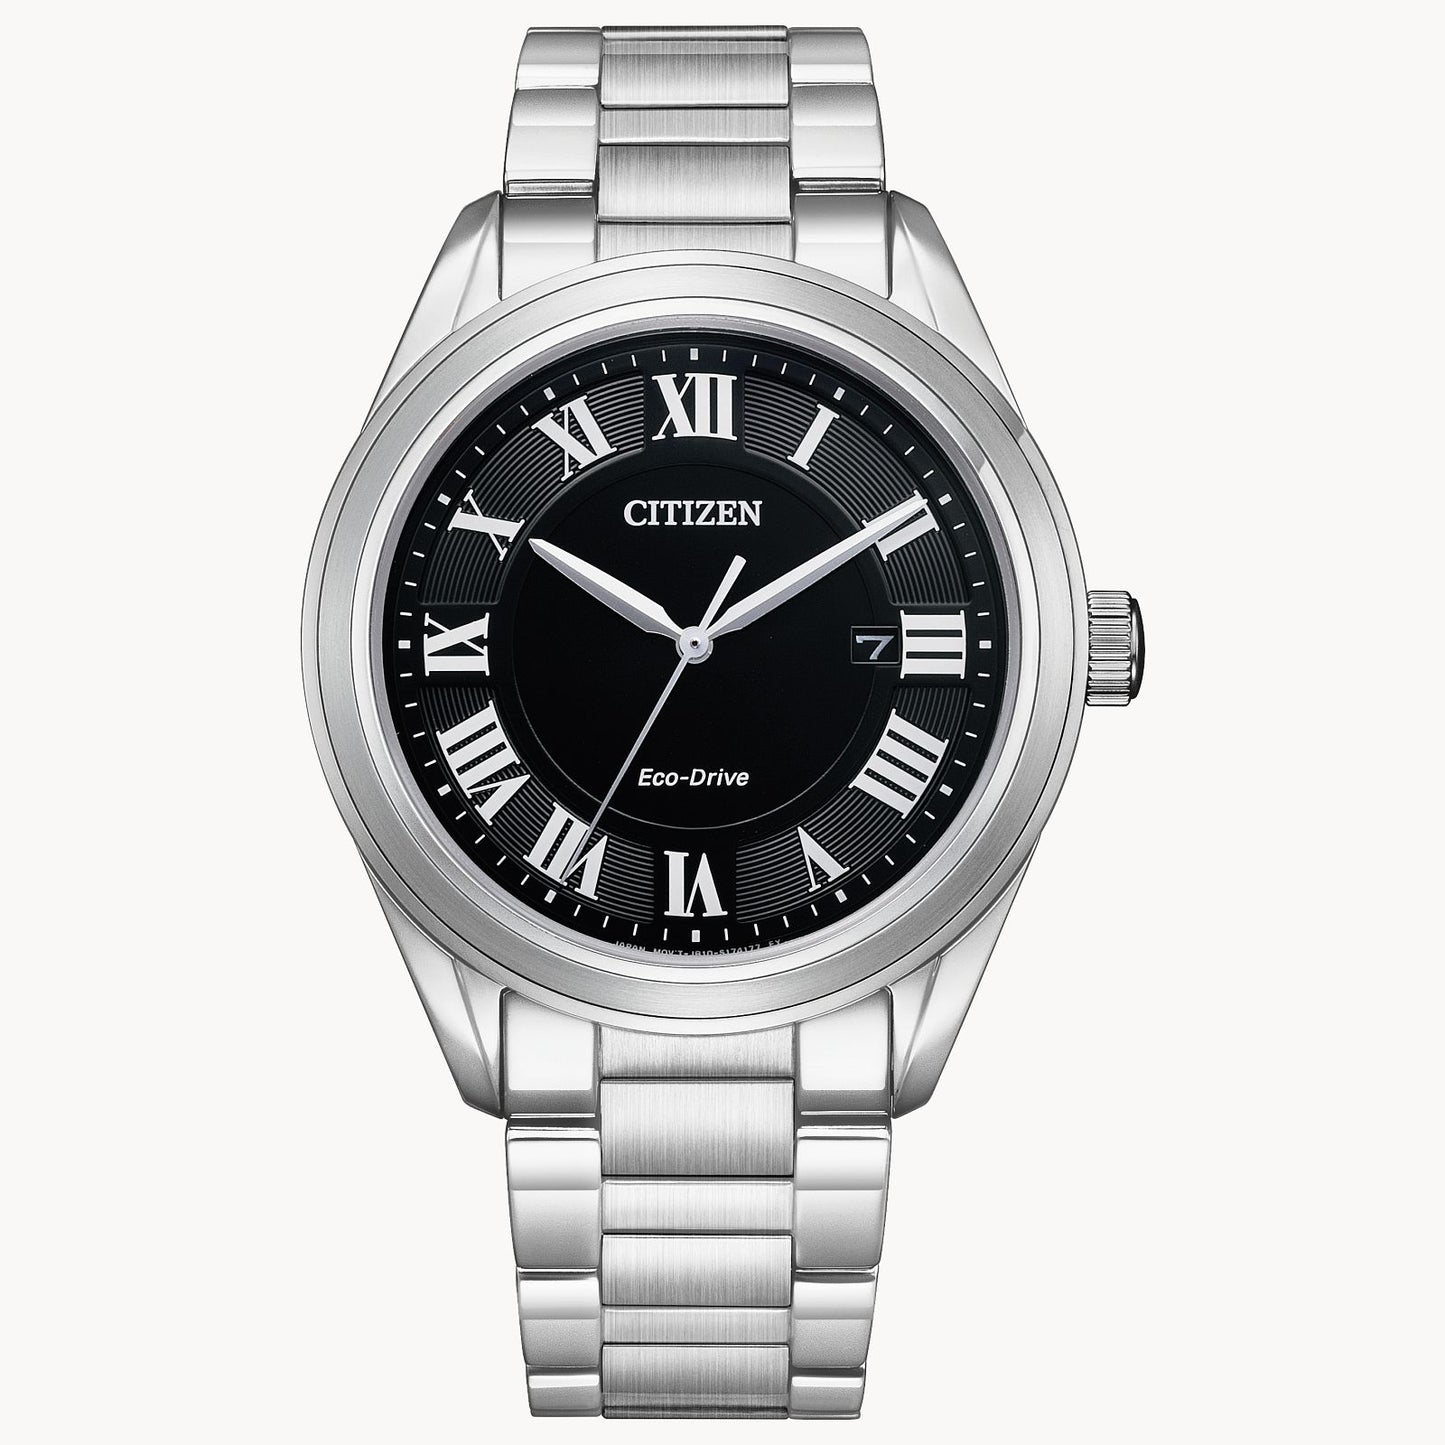 Citizen launched a men’s version of the classic Arezzo timepiece. This high-end, luxury watch makes a statement, with the silver-tone stainless steel case and bracelet paired with a black dial with bold silver-tone roman numerals. The three-hand dial also shows the current date, and the entire watch is sustainably powered by light with the exclusive Citizen Eco-Drive technology. For those looking for classic style and bold details, this statement watch is a must-have for every collection.